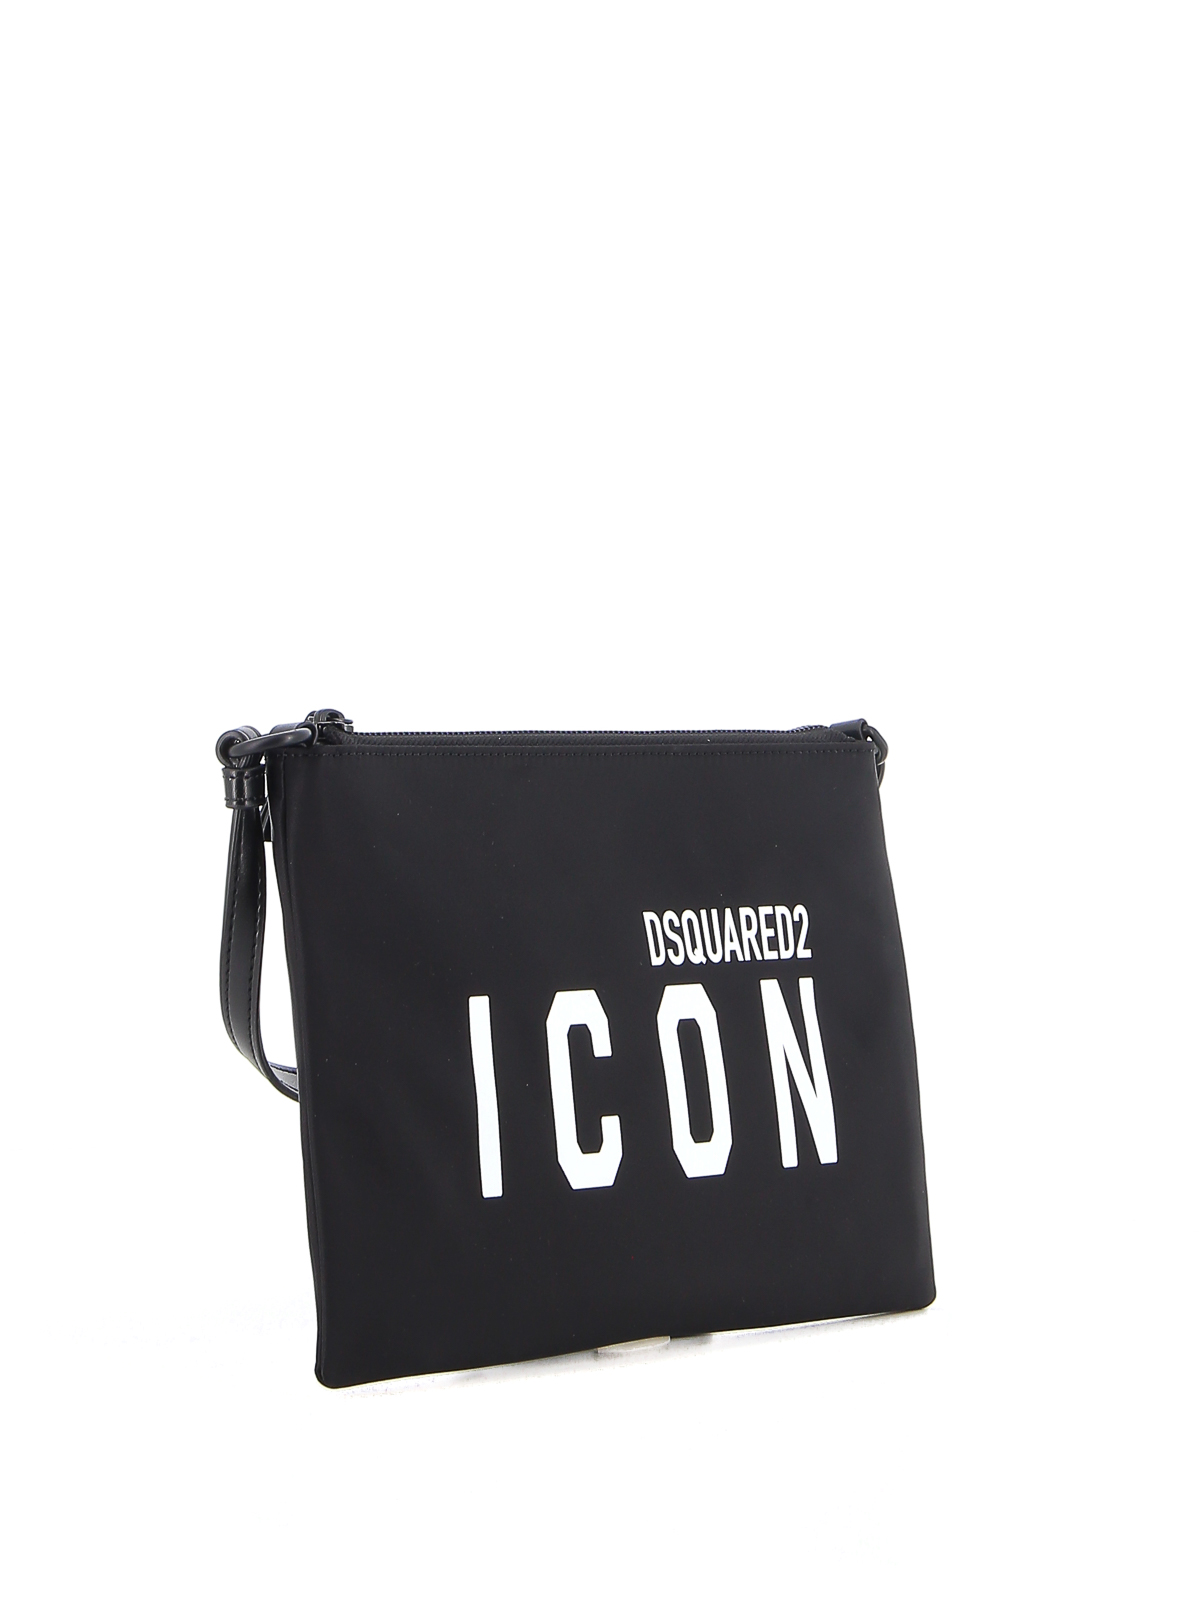 90％OFF】 DSQUARED2 ICON クラッチバック agapeeurope.org